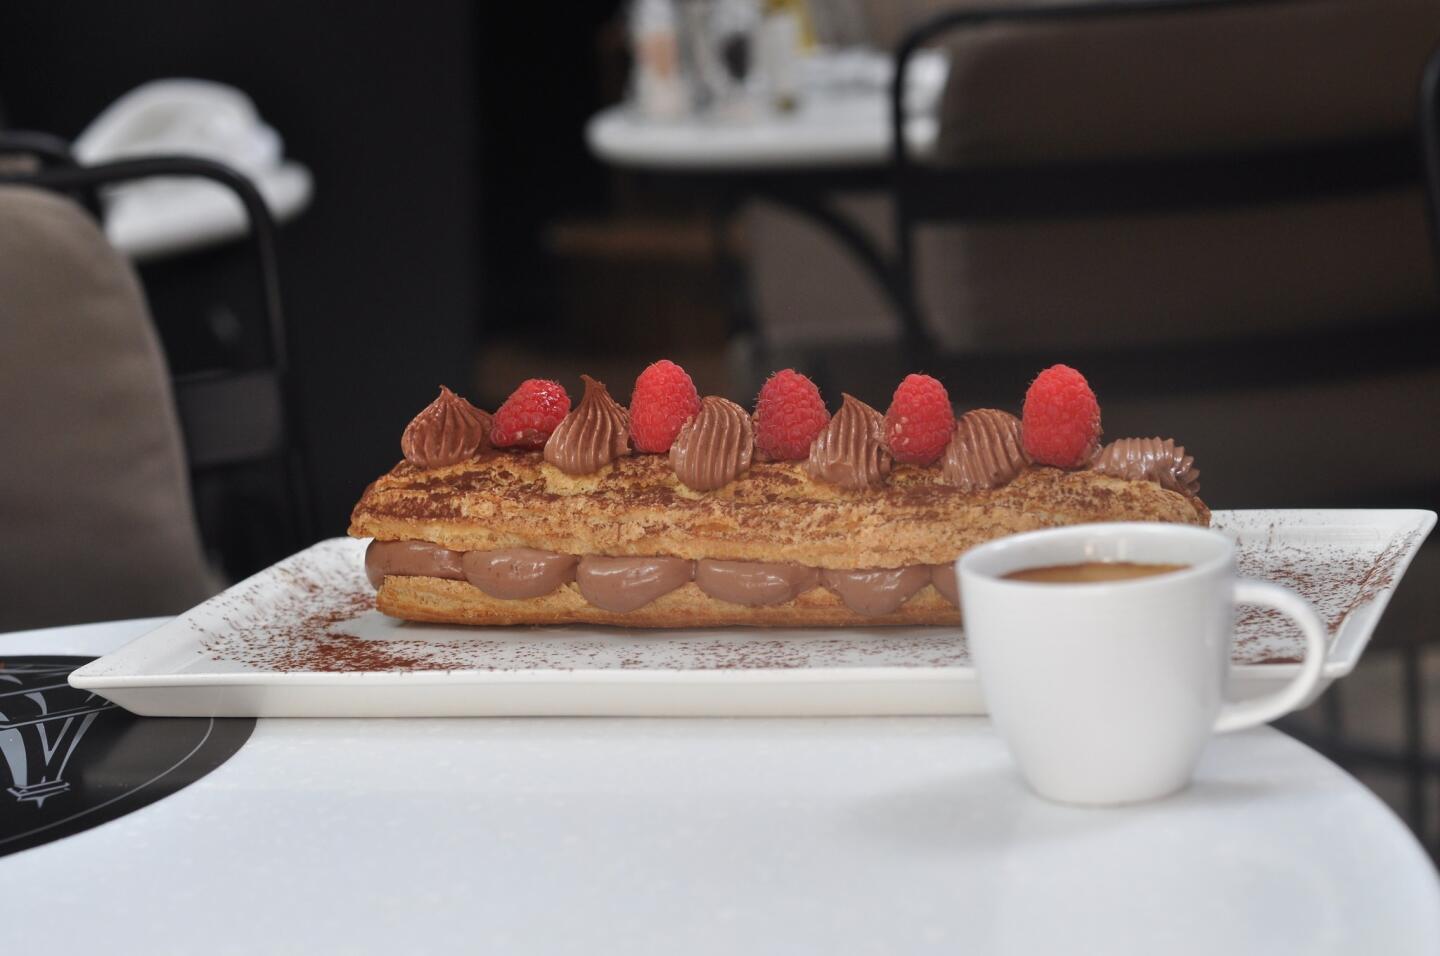 The grand eclair at Le Petit Paris in downtown L.A. is $22.